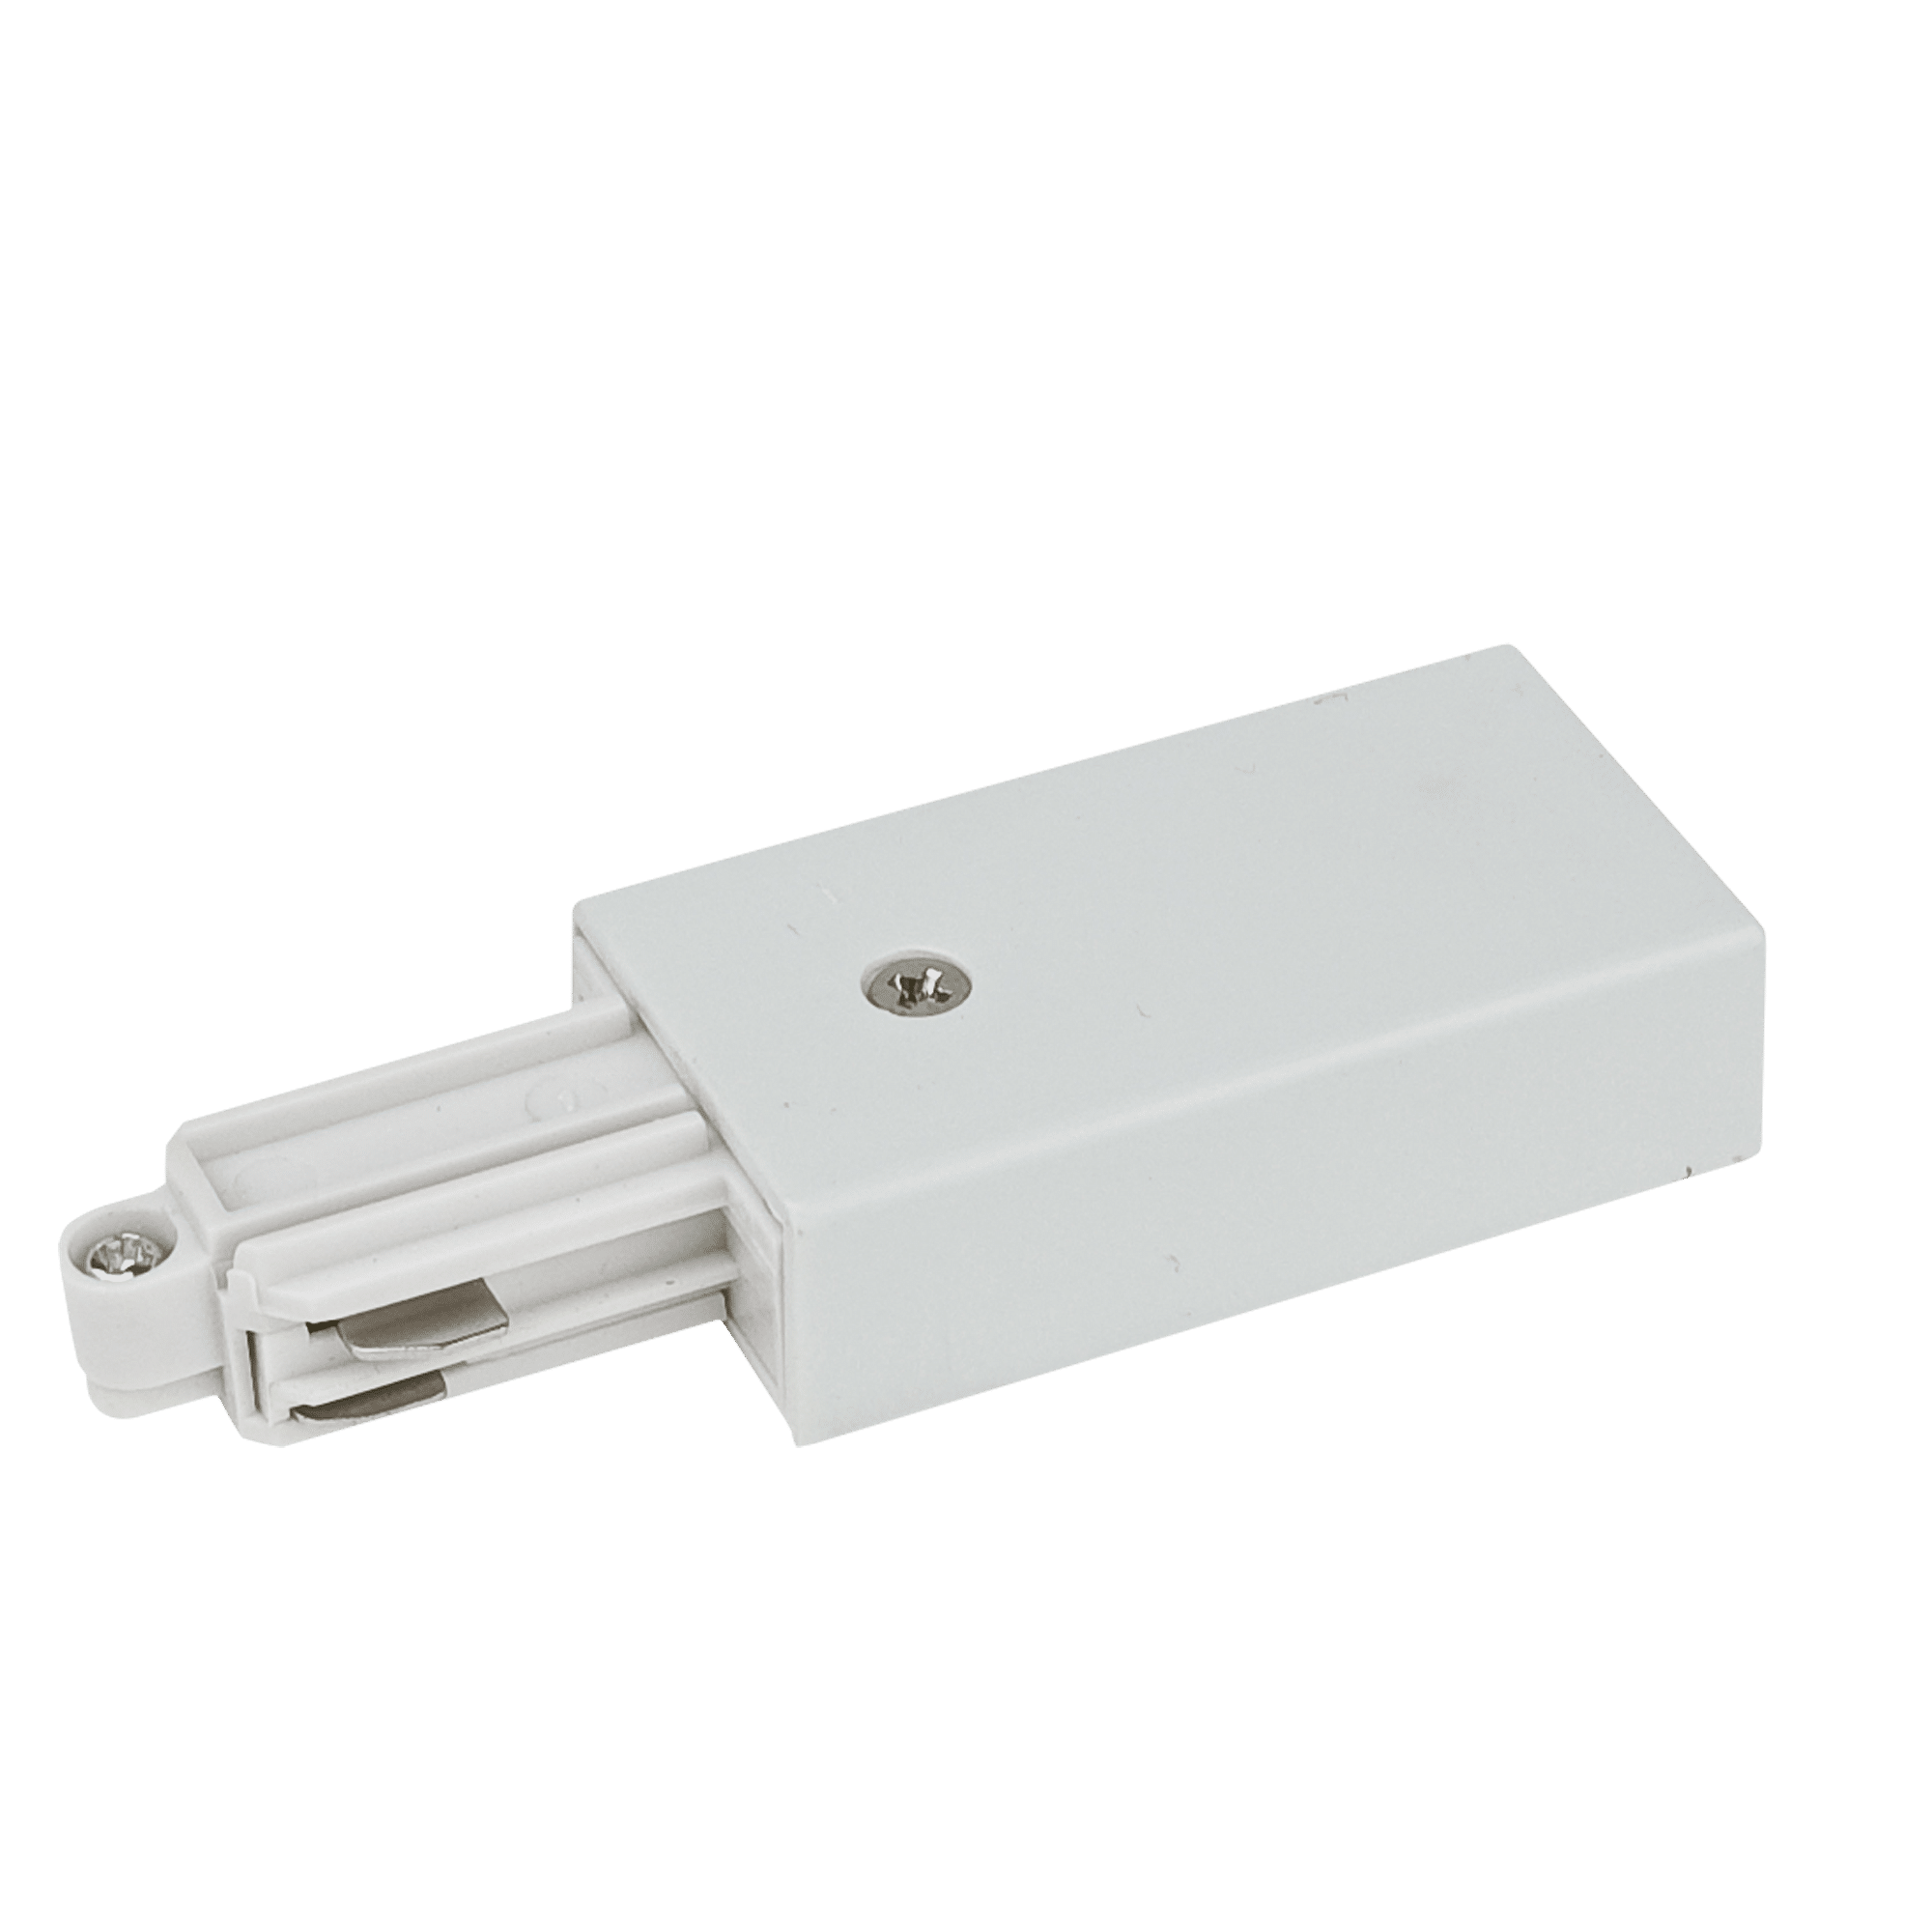 1-Phase Feed-In Connector - Onlinediscowinkel.nl